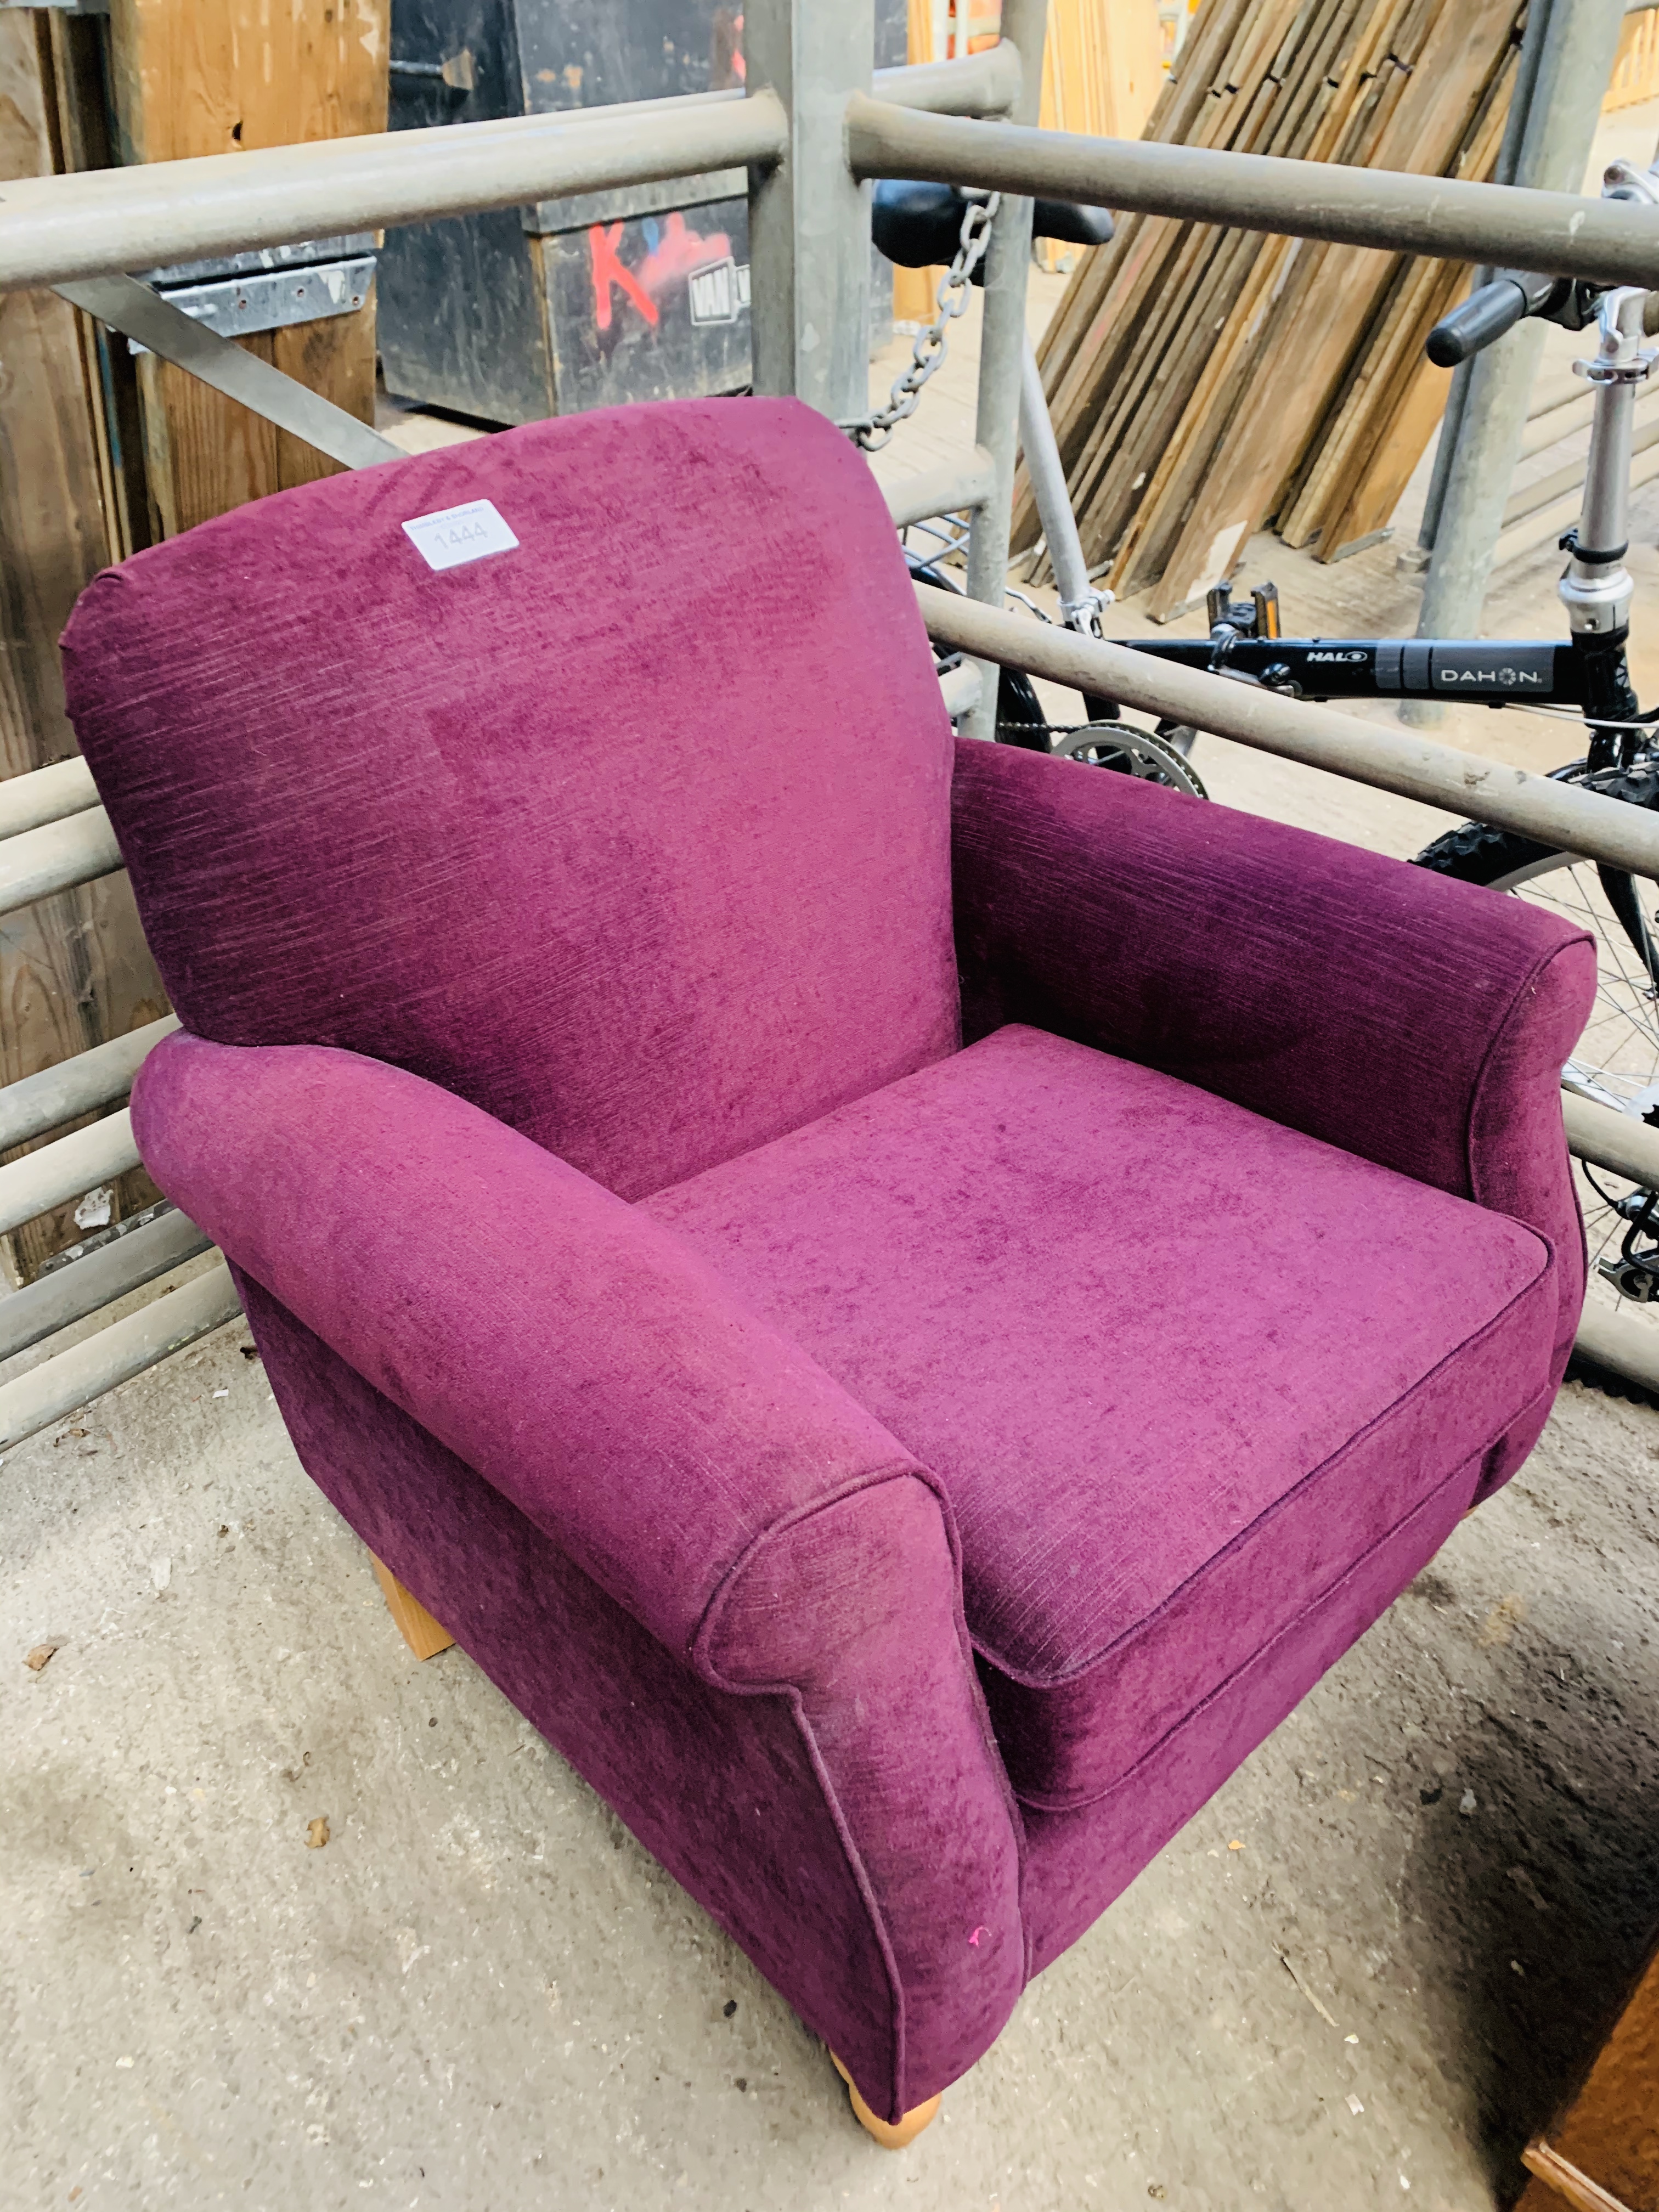 Purple armchair from Next.